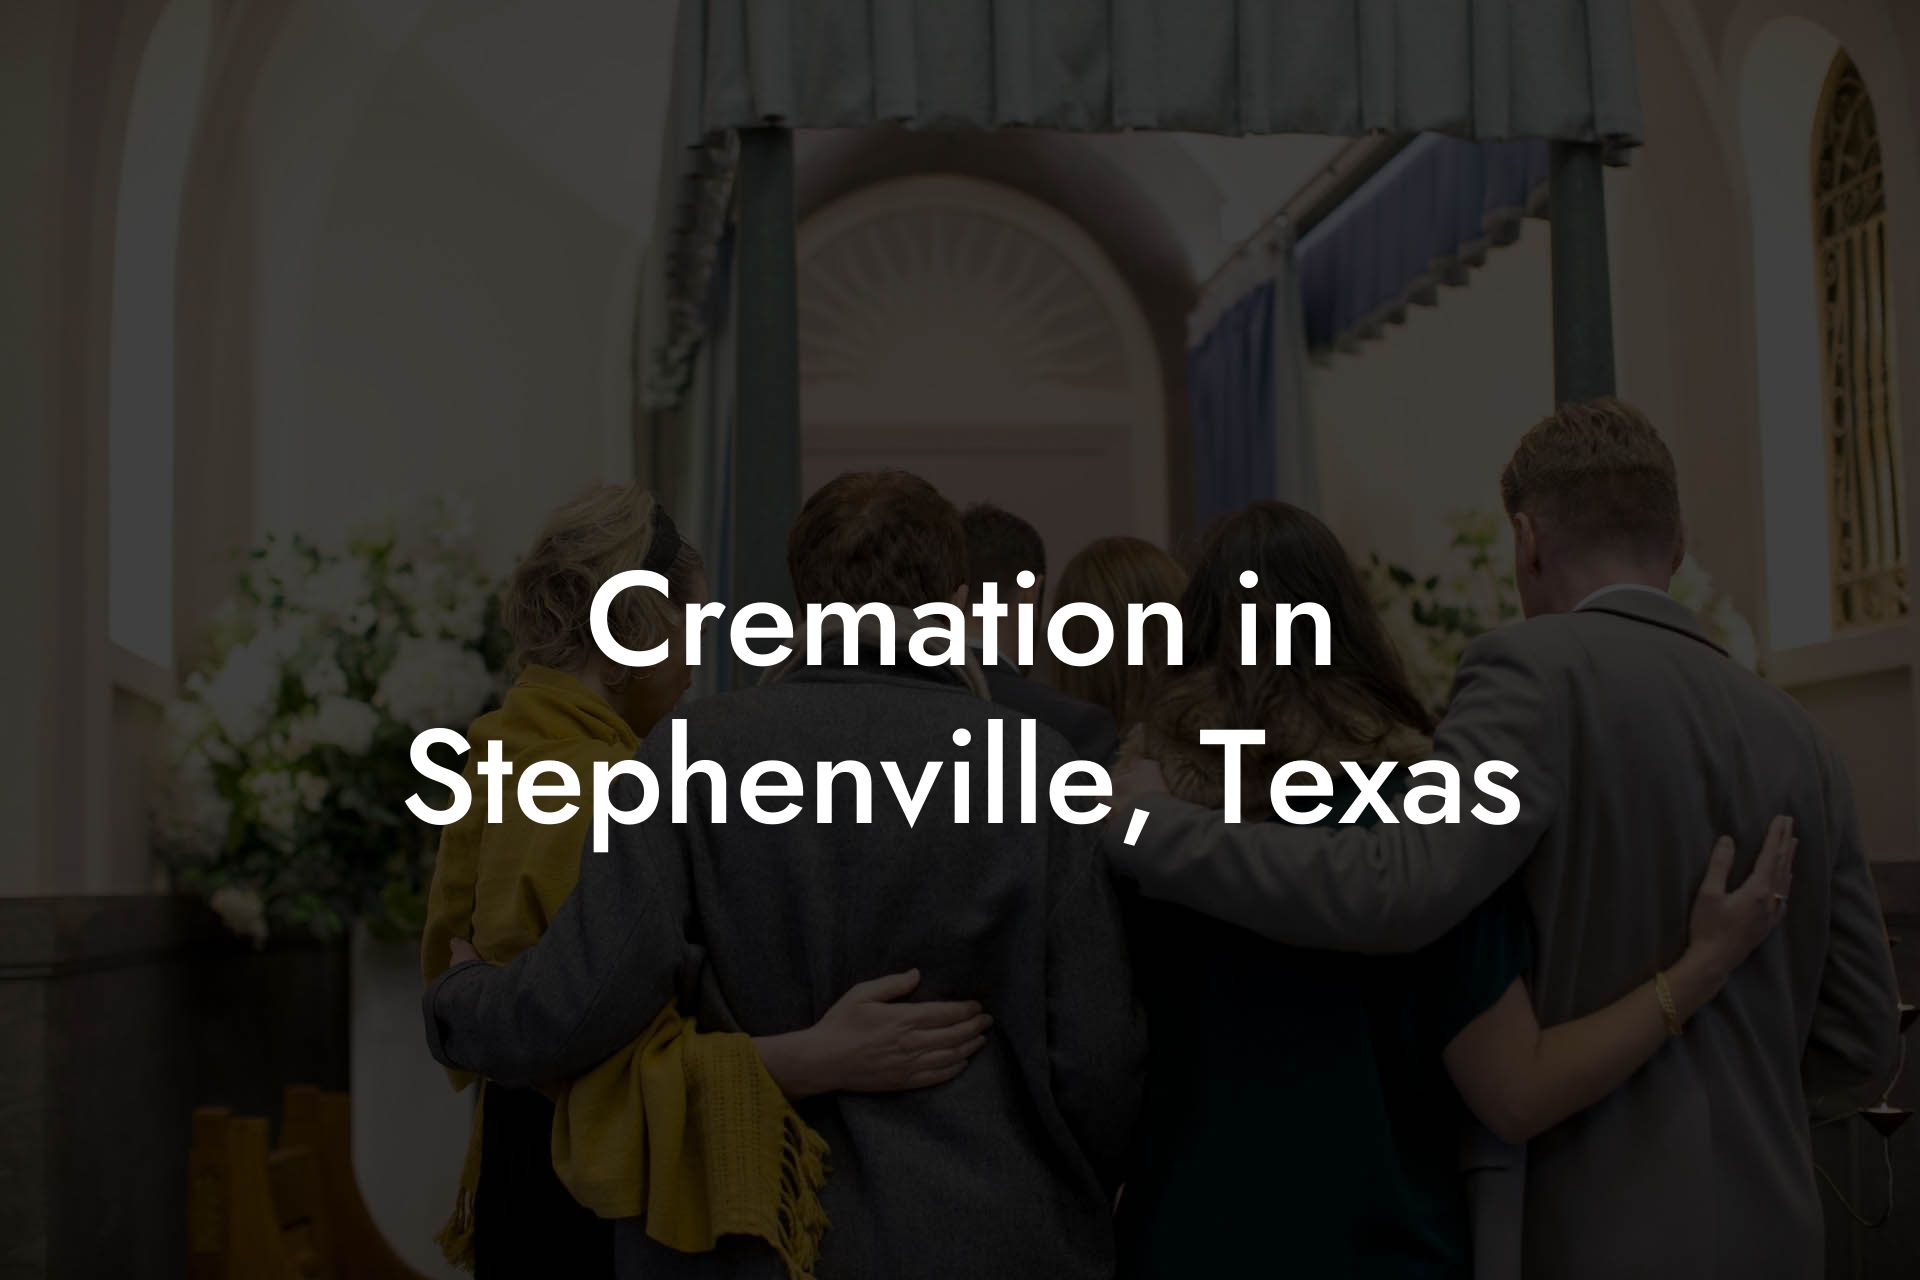 Cremation in Stephenville, Texas